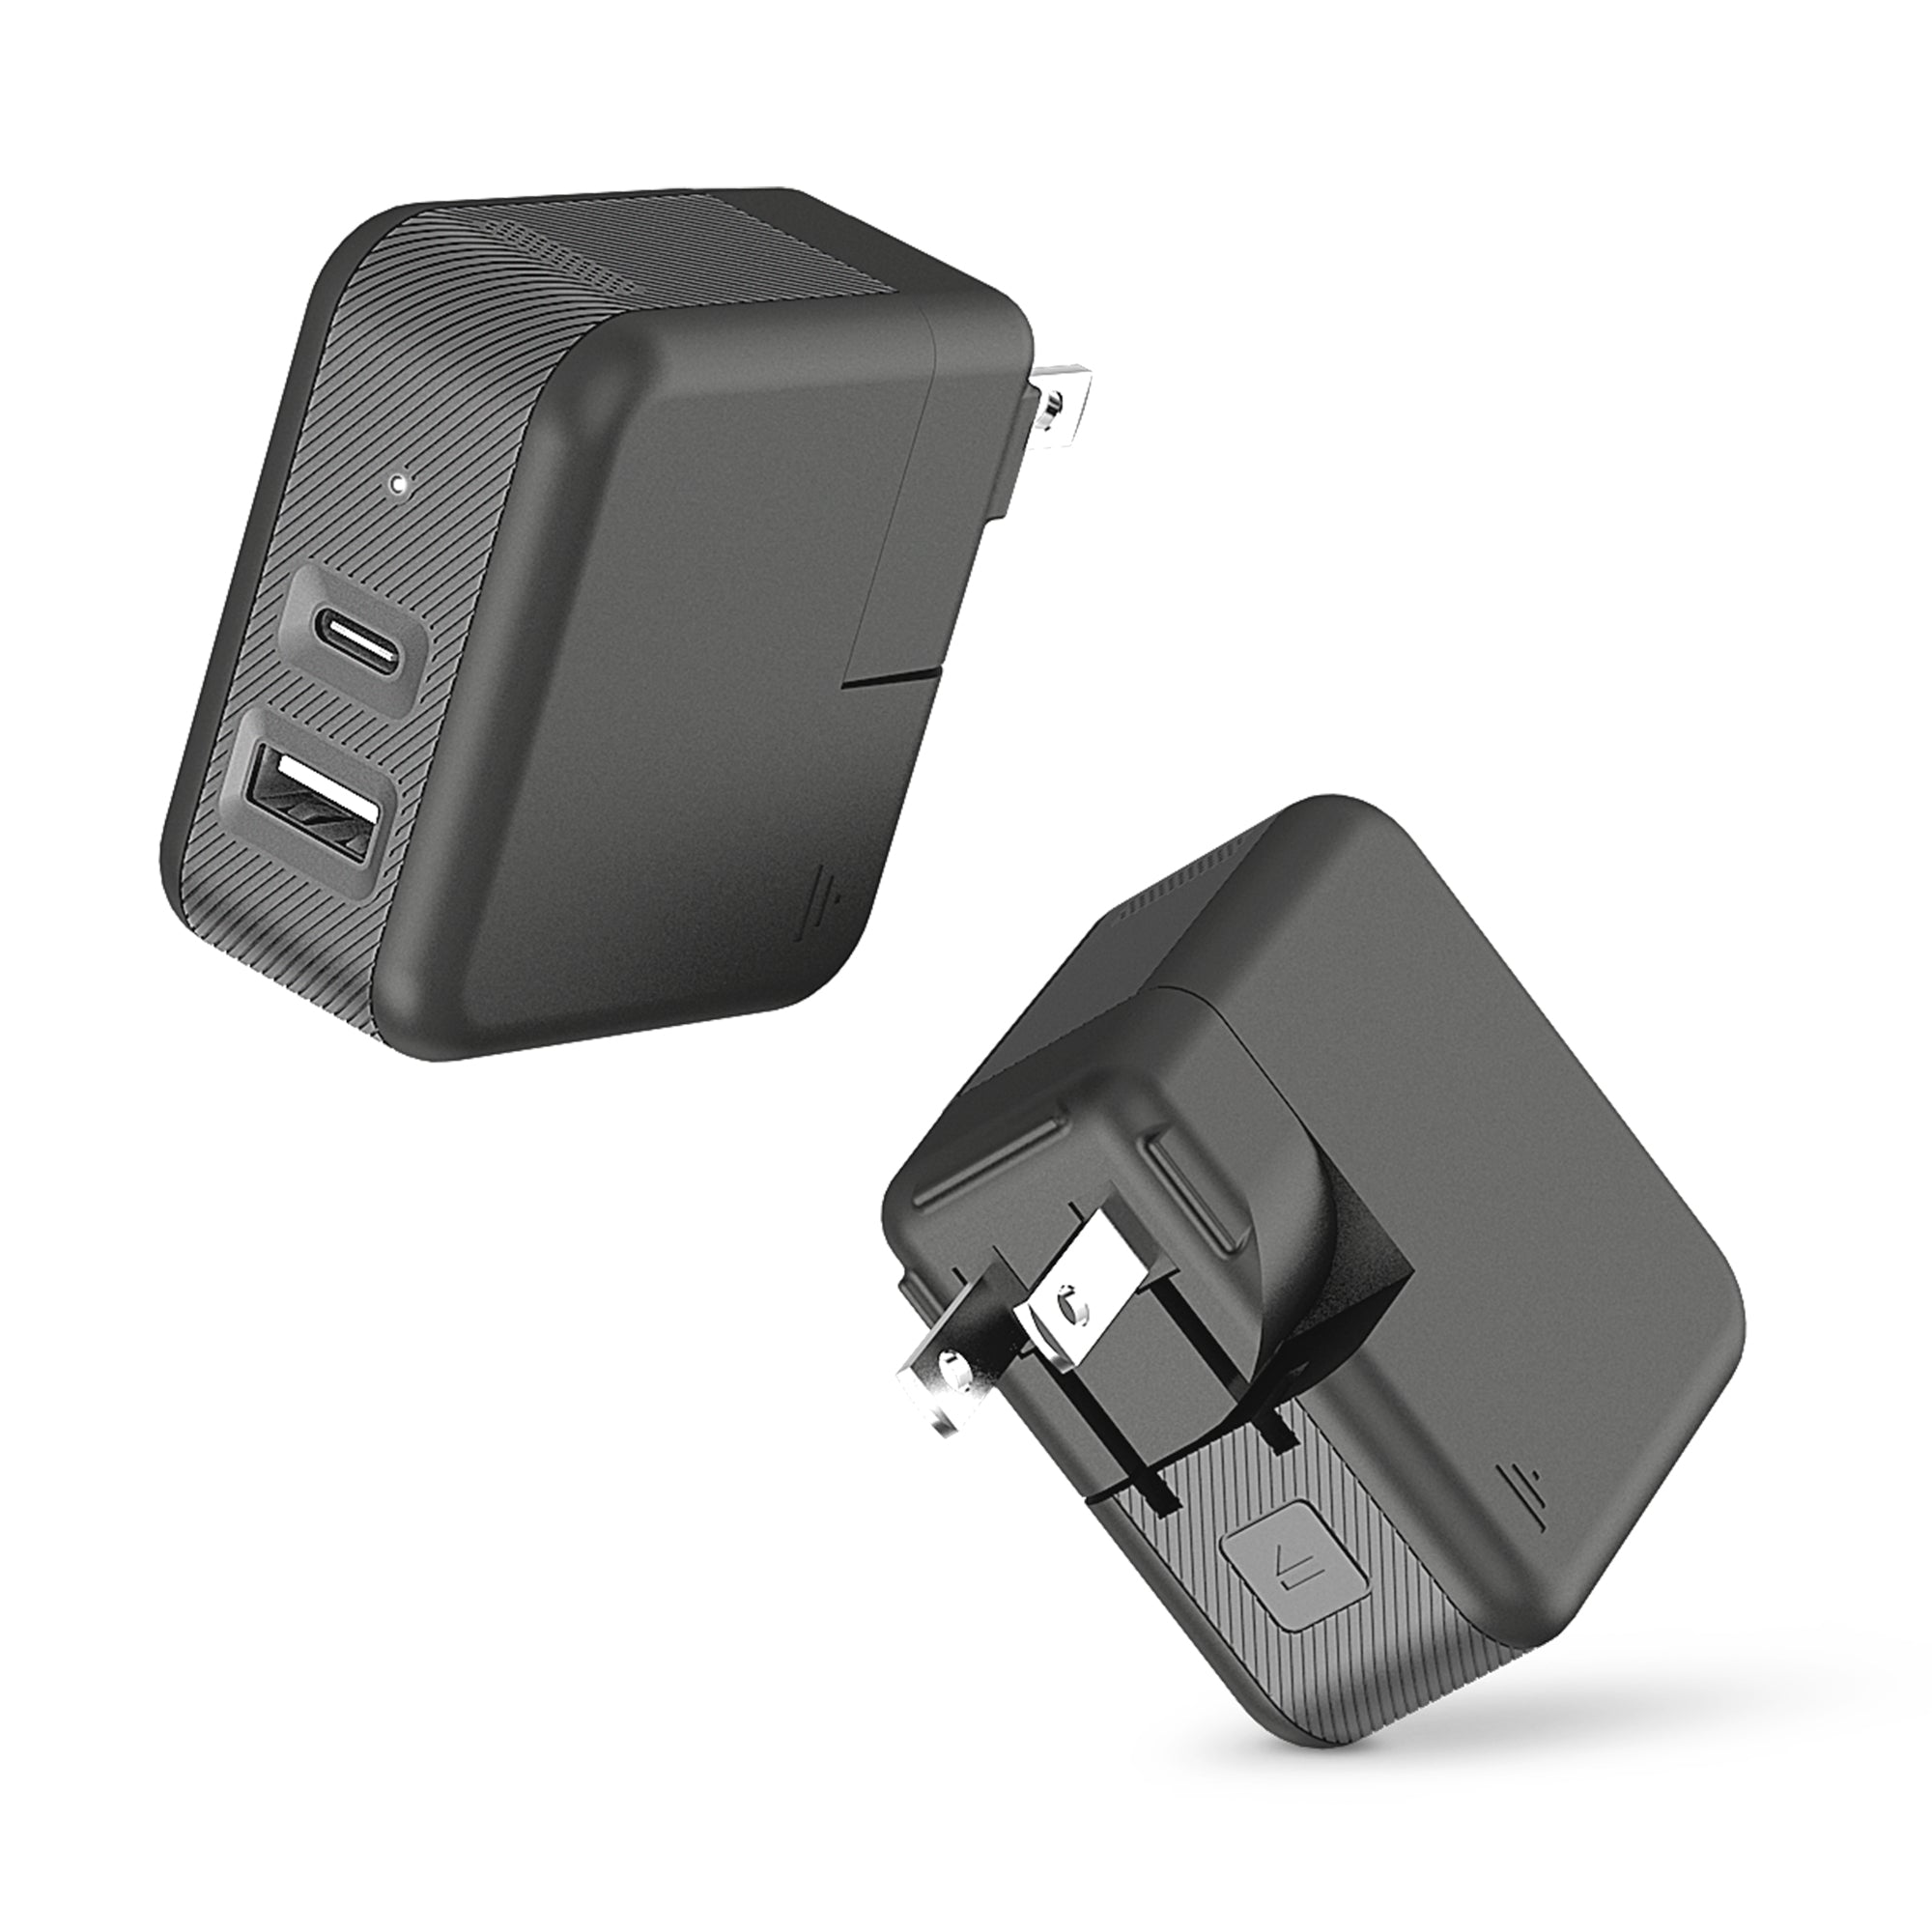 Just Wireless Phone & Laptop Charger with 6ft Lightning® to USB-C Cable - Quick and Powerful Wall Charger - Delivers 45 Watts of Power - Includes 6ft Lightning® to USB-C Cable - Dual Charge with USB-C and USB-A Ports - Supports Power Delivery (PD) - Rotating Prongs for Easy Plug Management - Features GaN Technology - Charges up to 50% in 30 Minutes with PD - Charge Your Laptop - Includes Hardshell Case